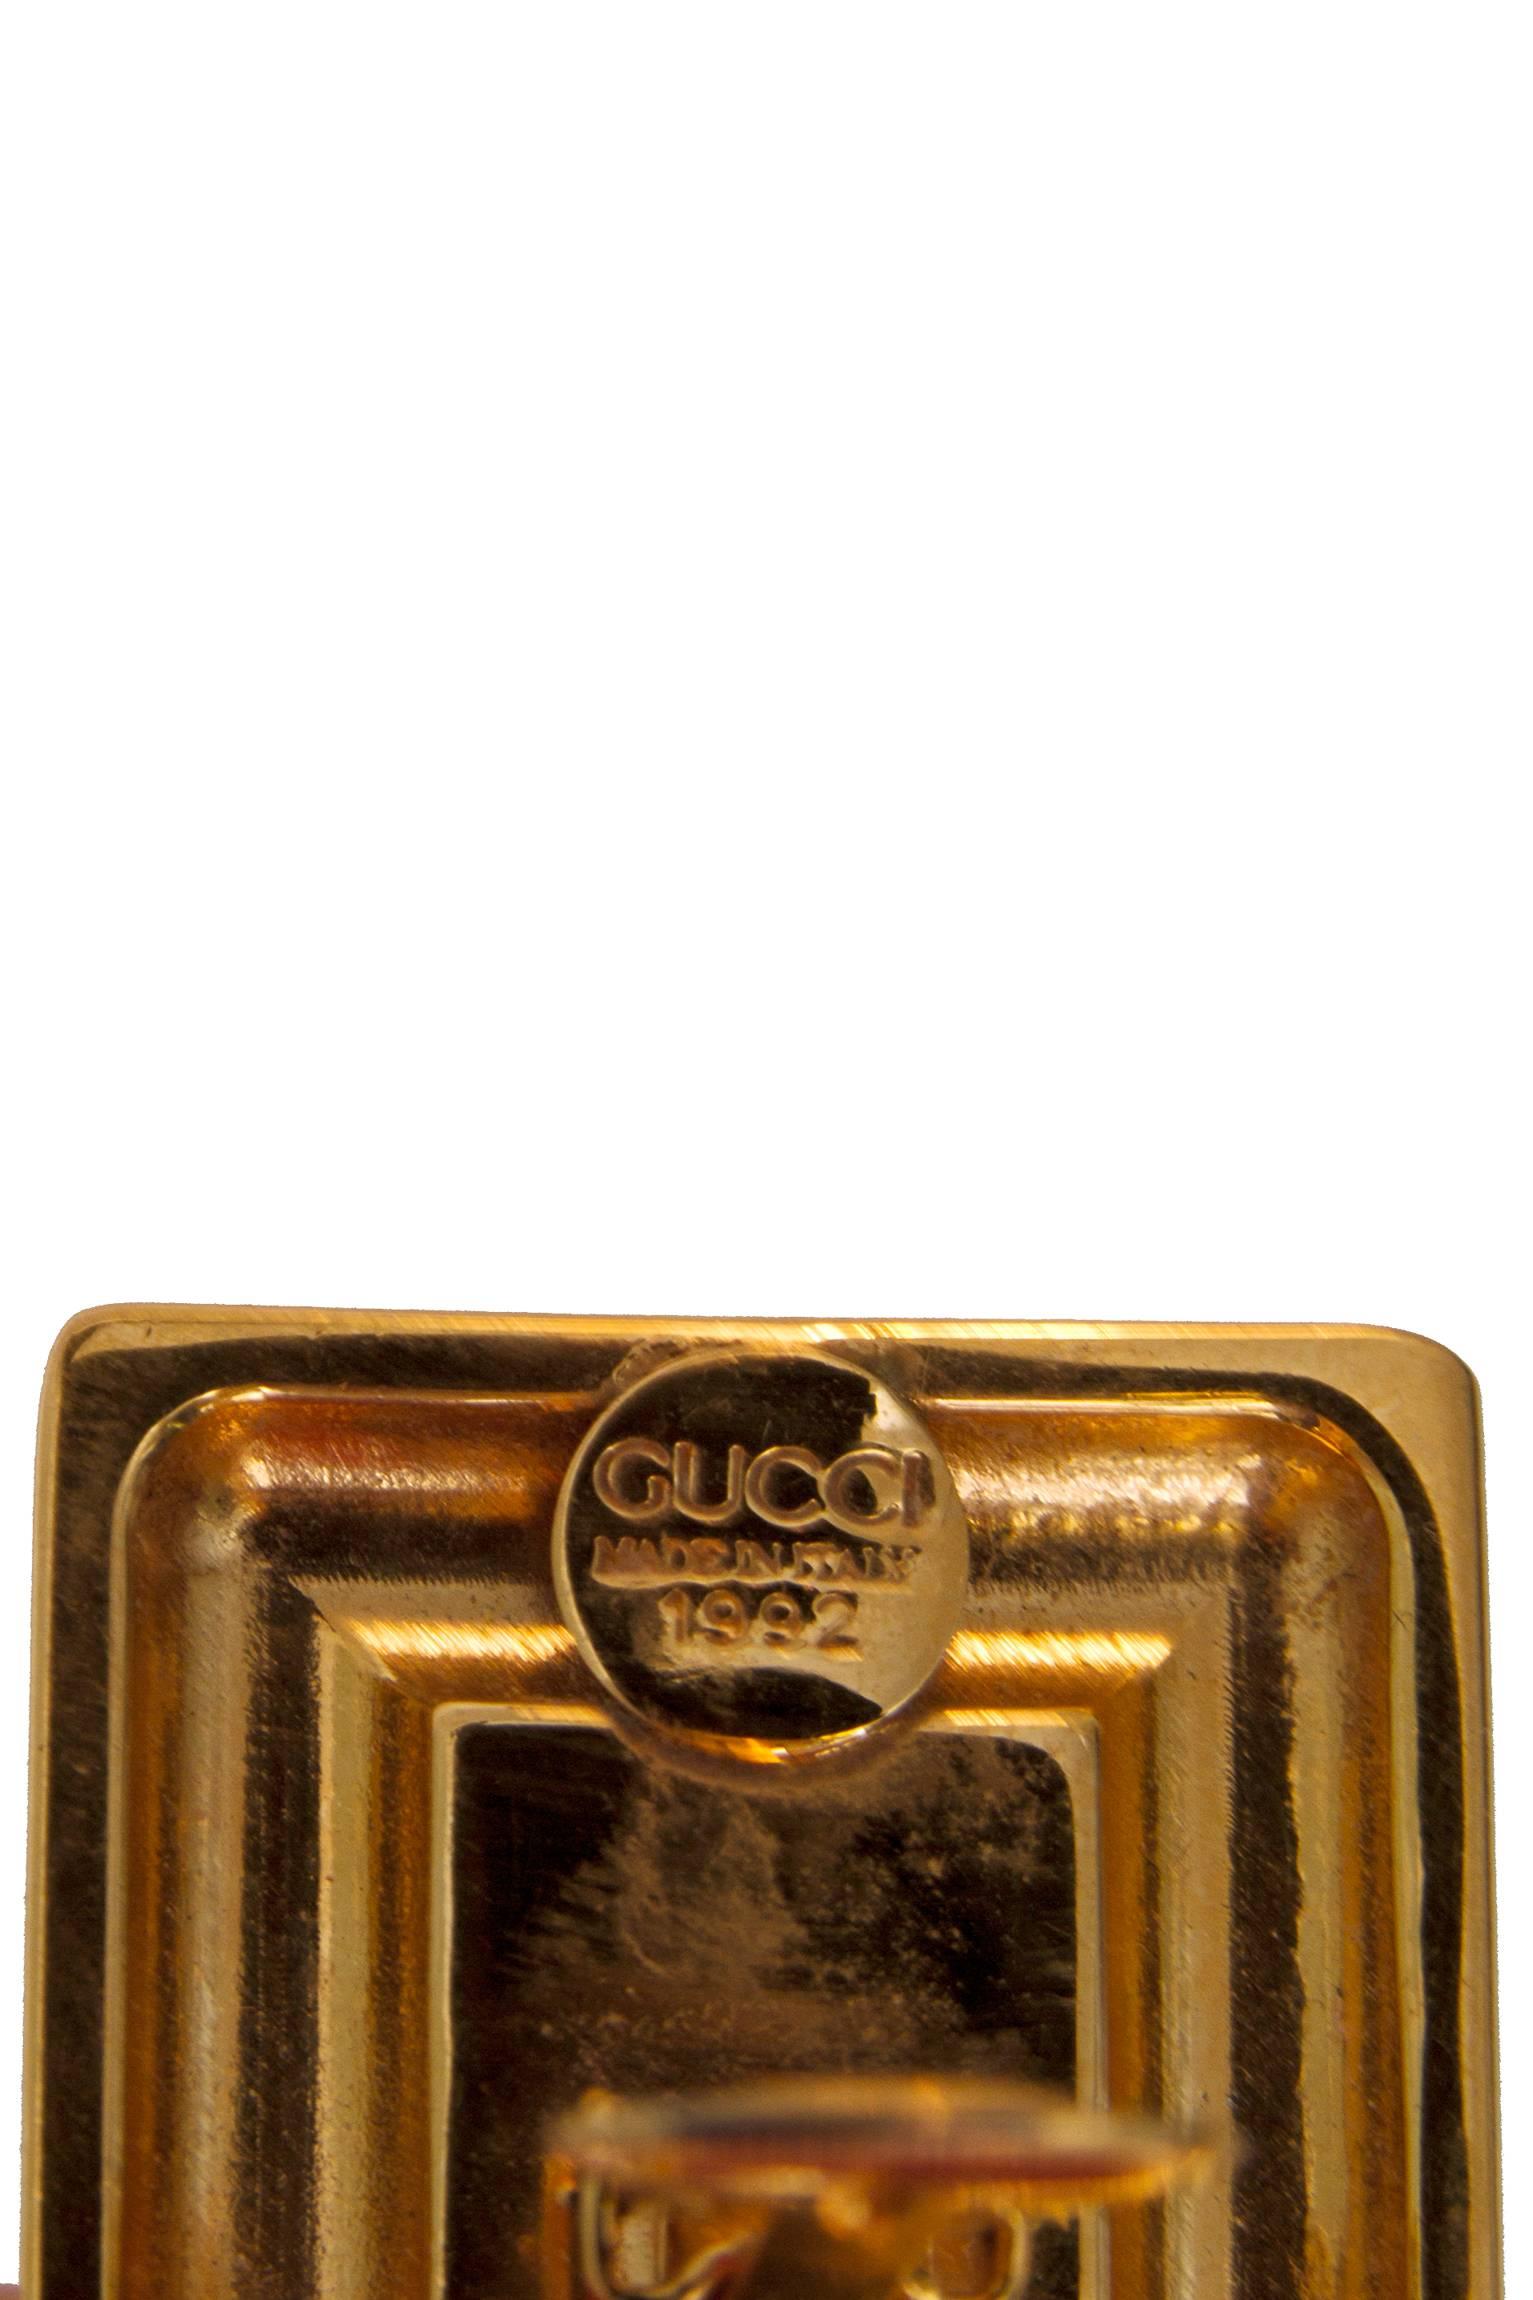 A pair of gold plated Gucci clip-on earrings dating from 1992. The square earrings have a round double 'G' logo set in center. The logo measures 1.5 by 1.5 cm. 

The earrings are stamped: Gucci, Made in Italy, 1992